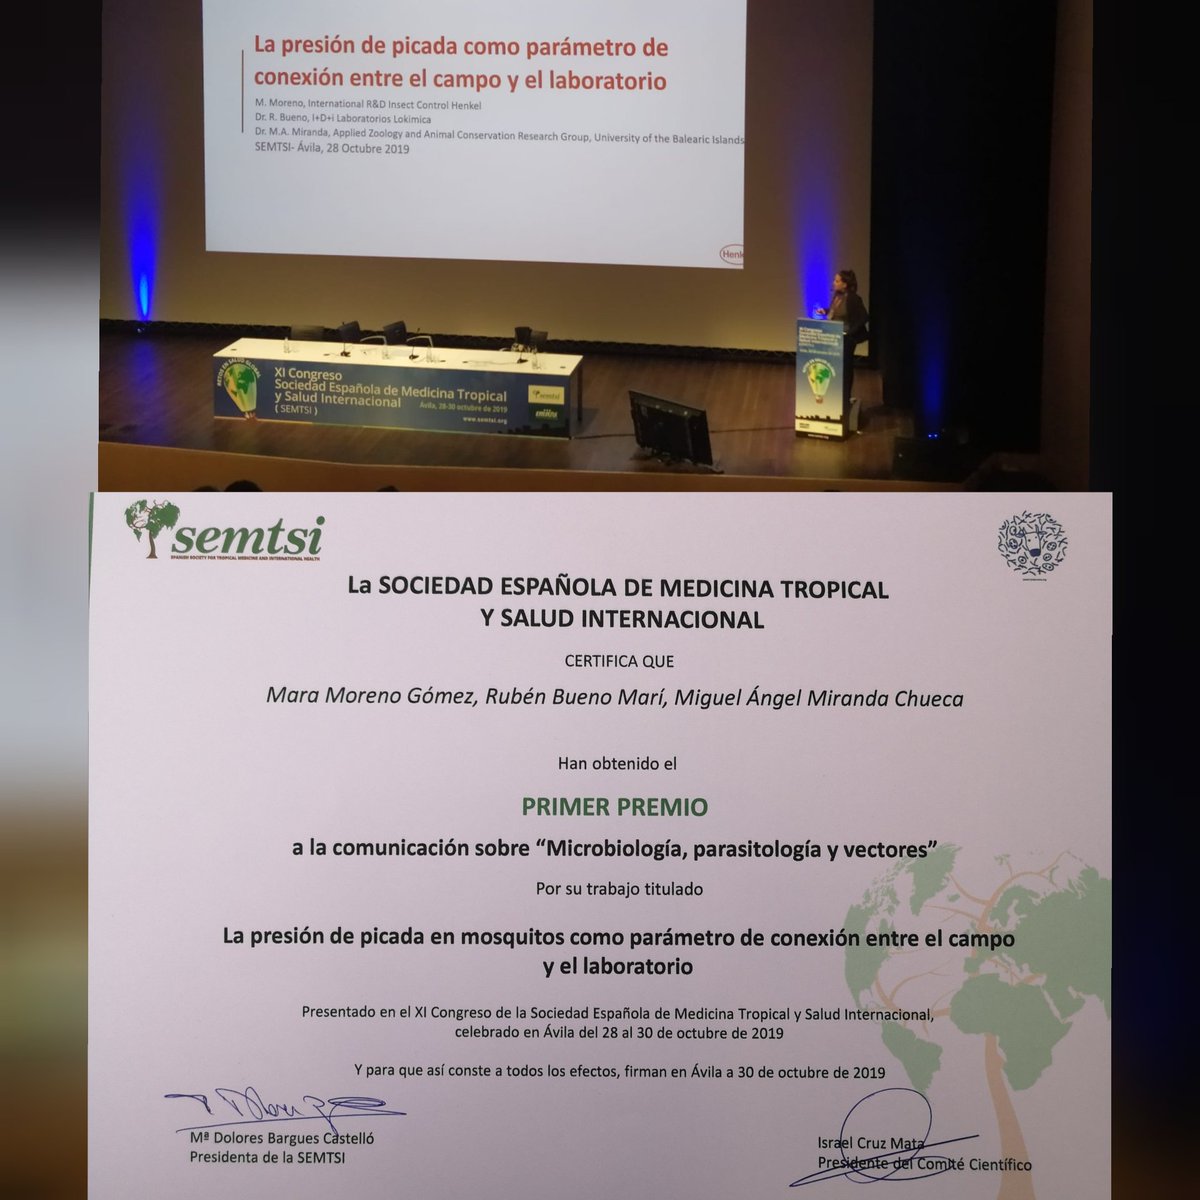 Happy and proud to have the opportunity to talk in the #SEMTSI2019 congress about our last study and being rewarded for our #oralpresentation about #Mosquitoes #Vector #fieldwork #laboratorytest @rubueno10 @MAMirandaTweet